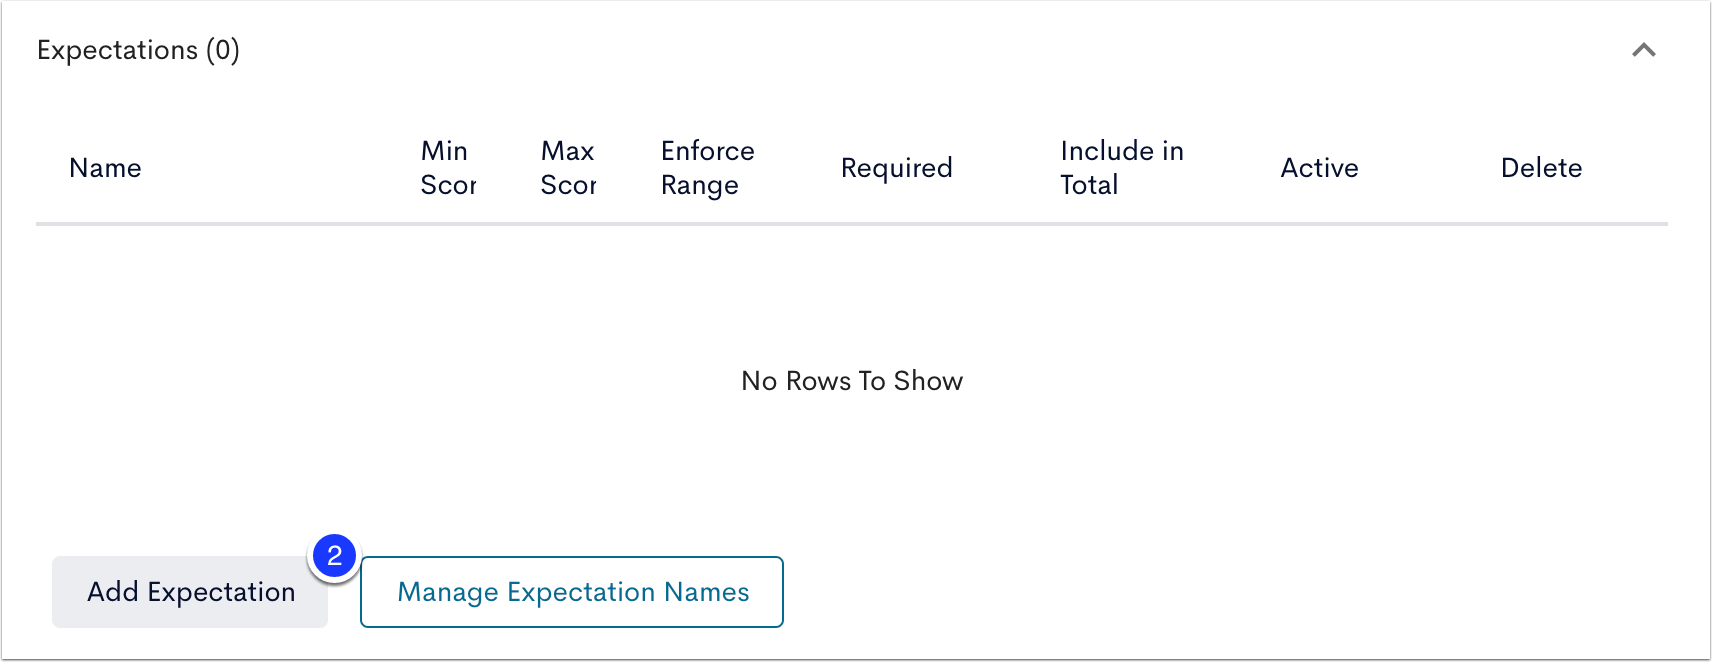 image of expectations module with add expectations marked as step 2